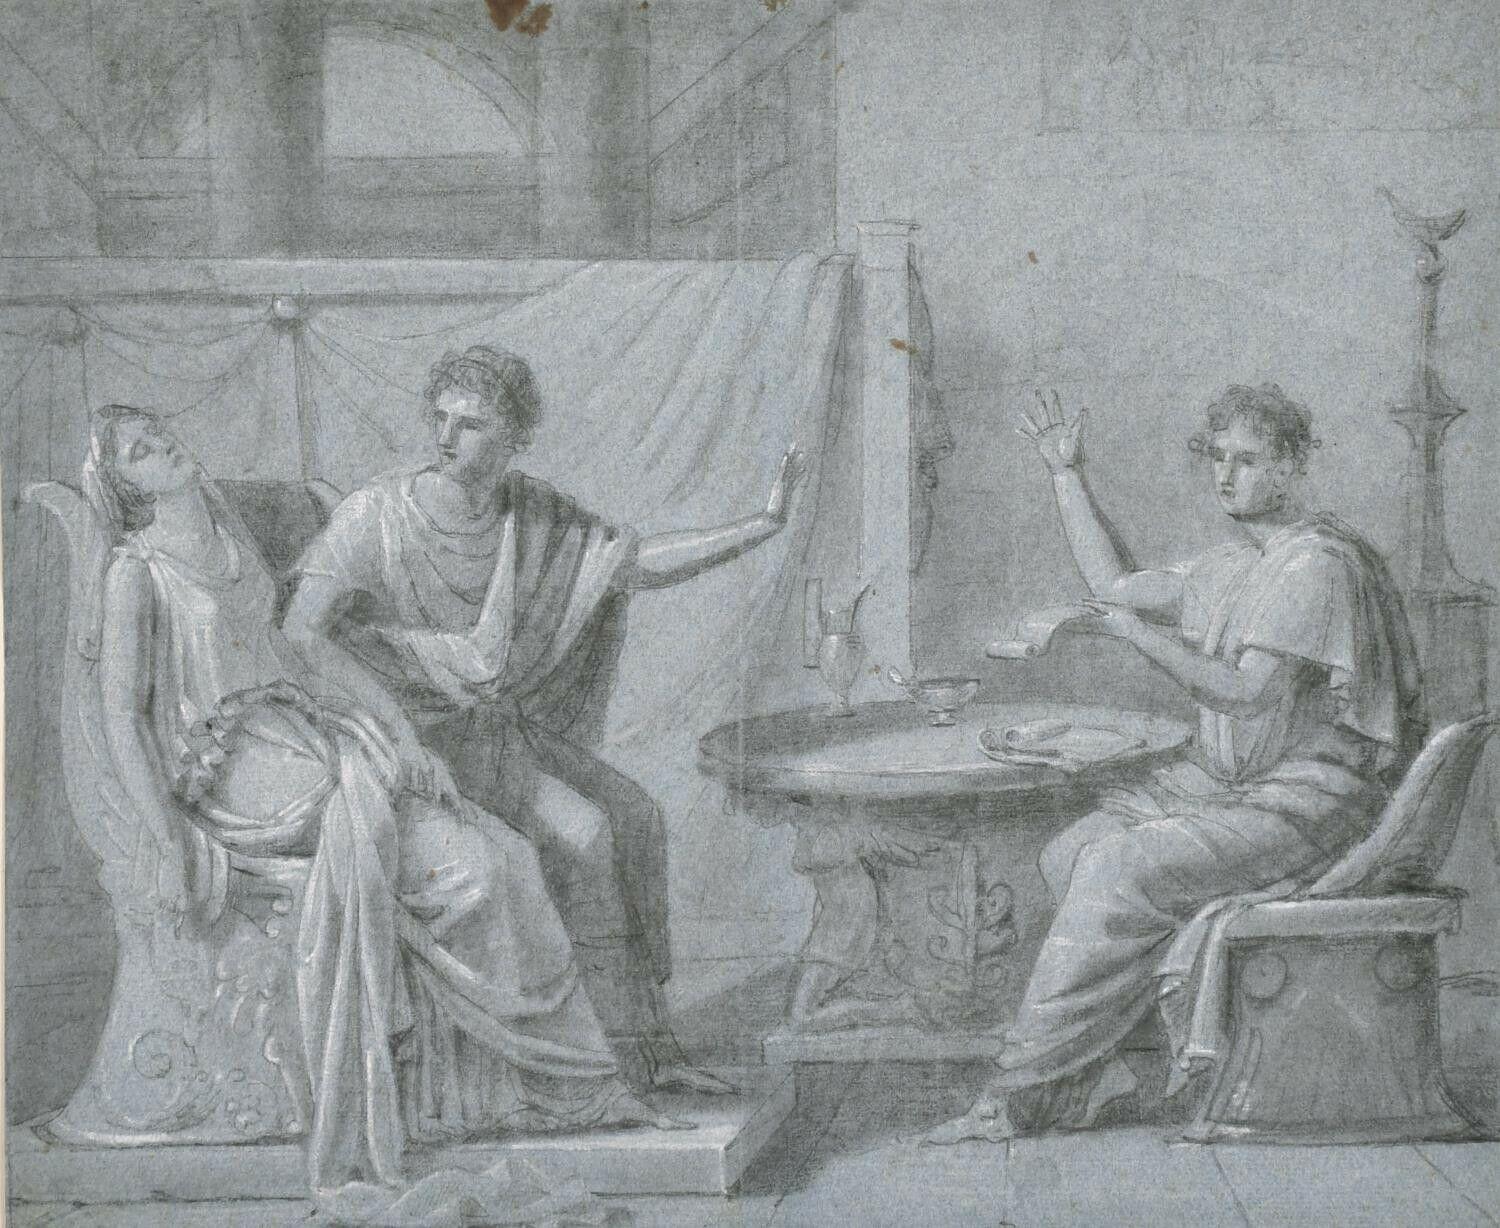 Unknown Figurative Painting - FINE 18th CENTURY OLD MASTER CHALK DRAWING - ROMANESQUE FIGURES INTERIOR SCENE